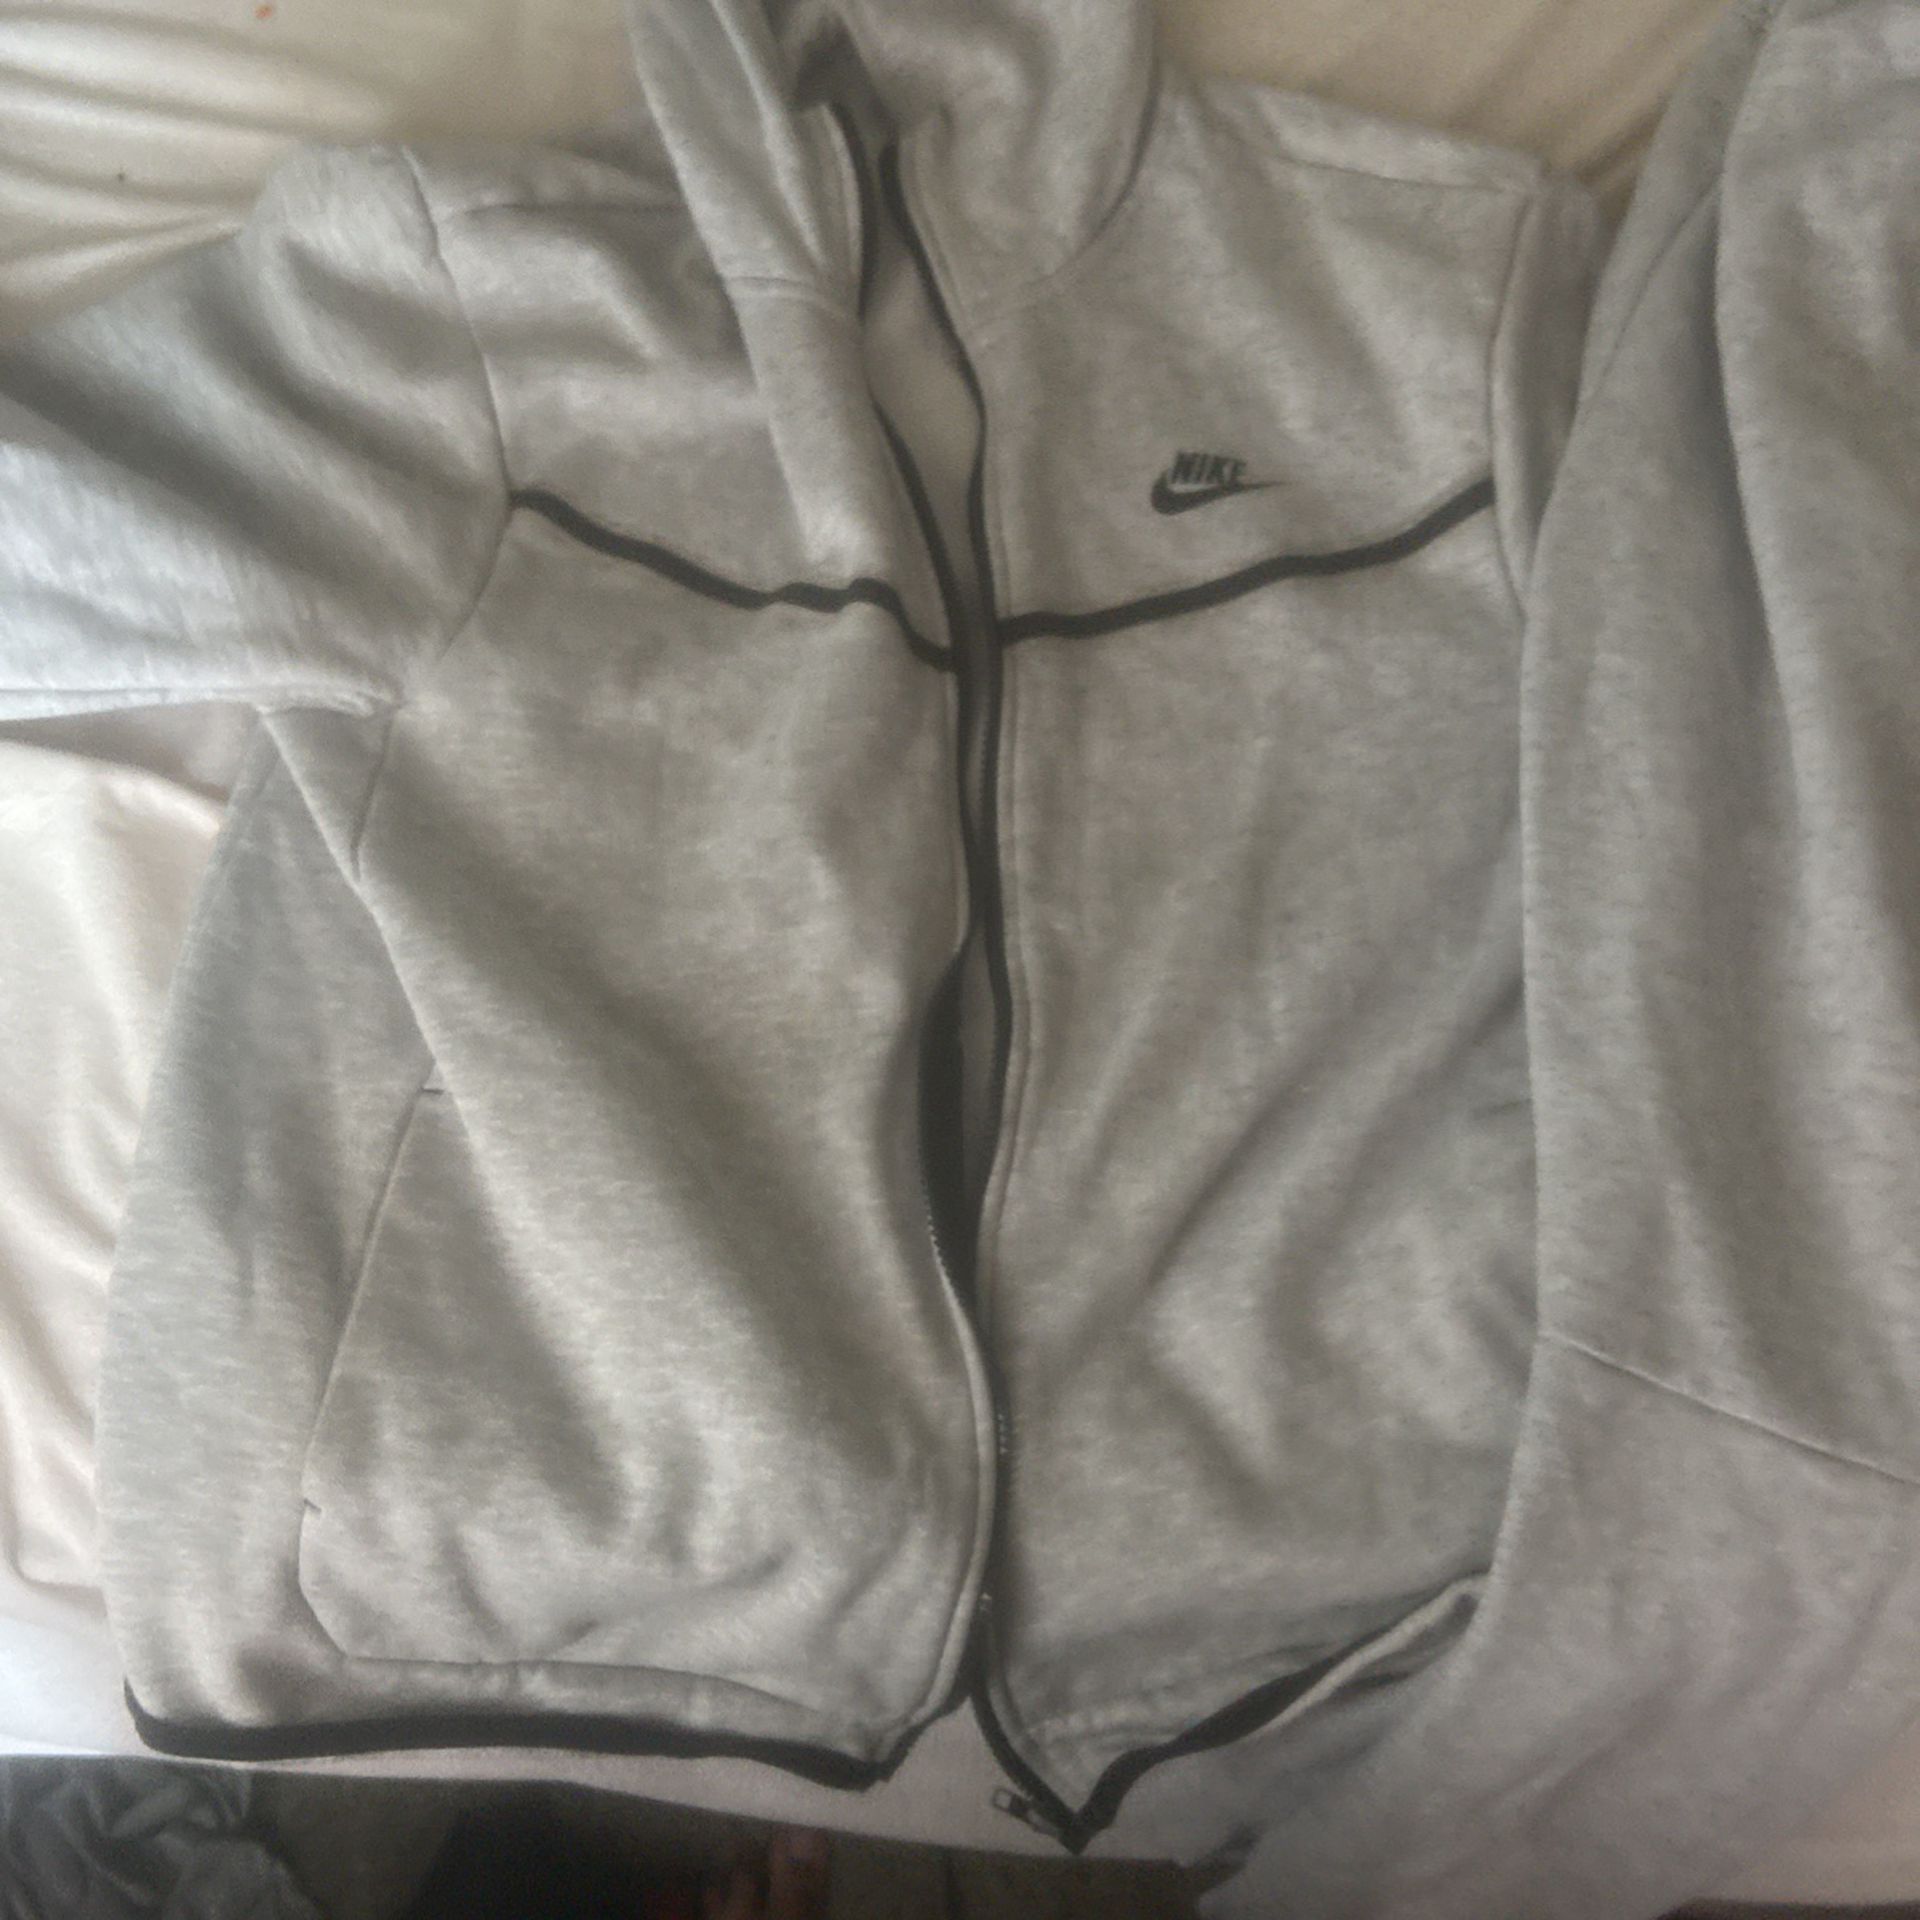 Xl Large Full Track Suit Grey Nike Tech